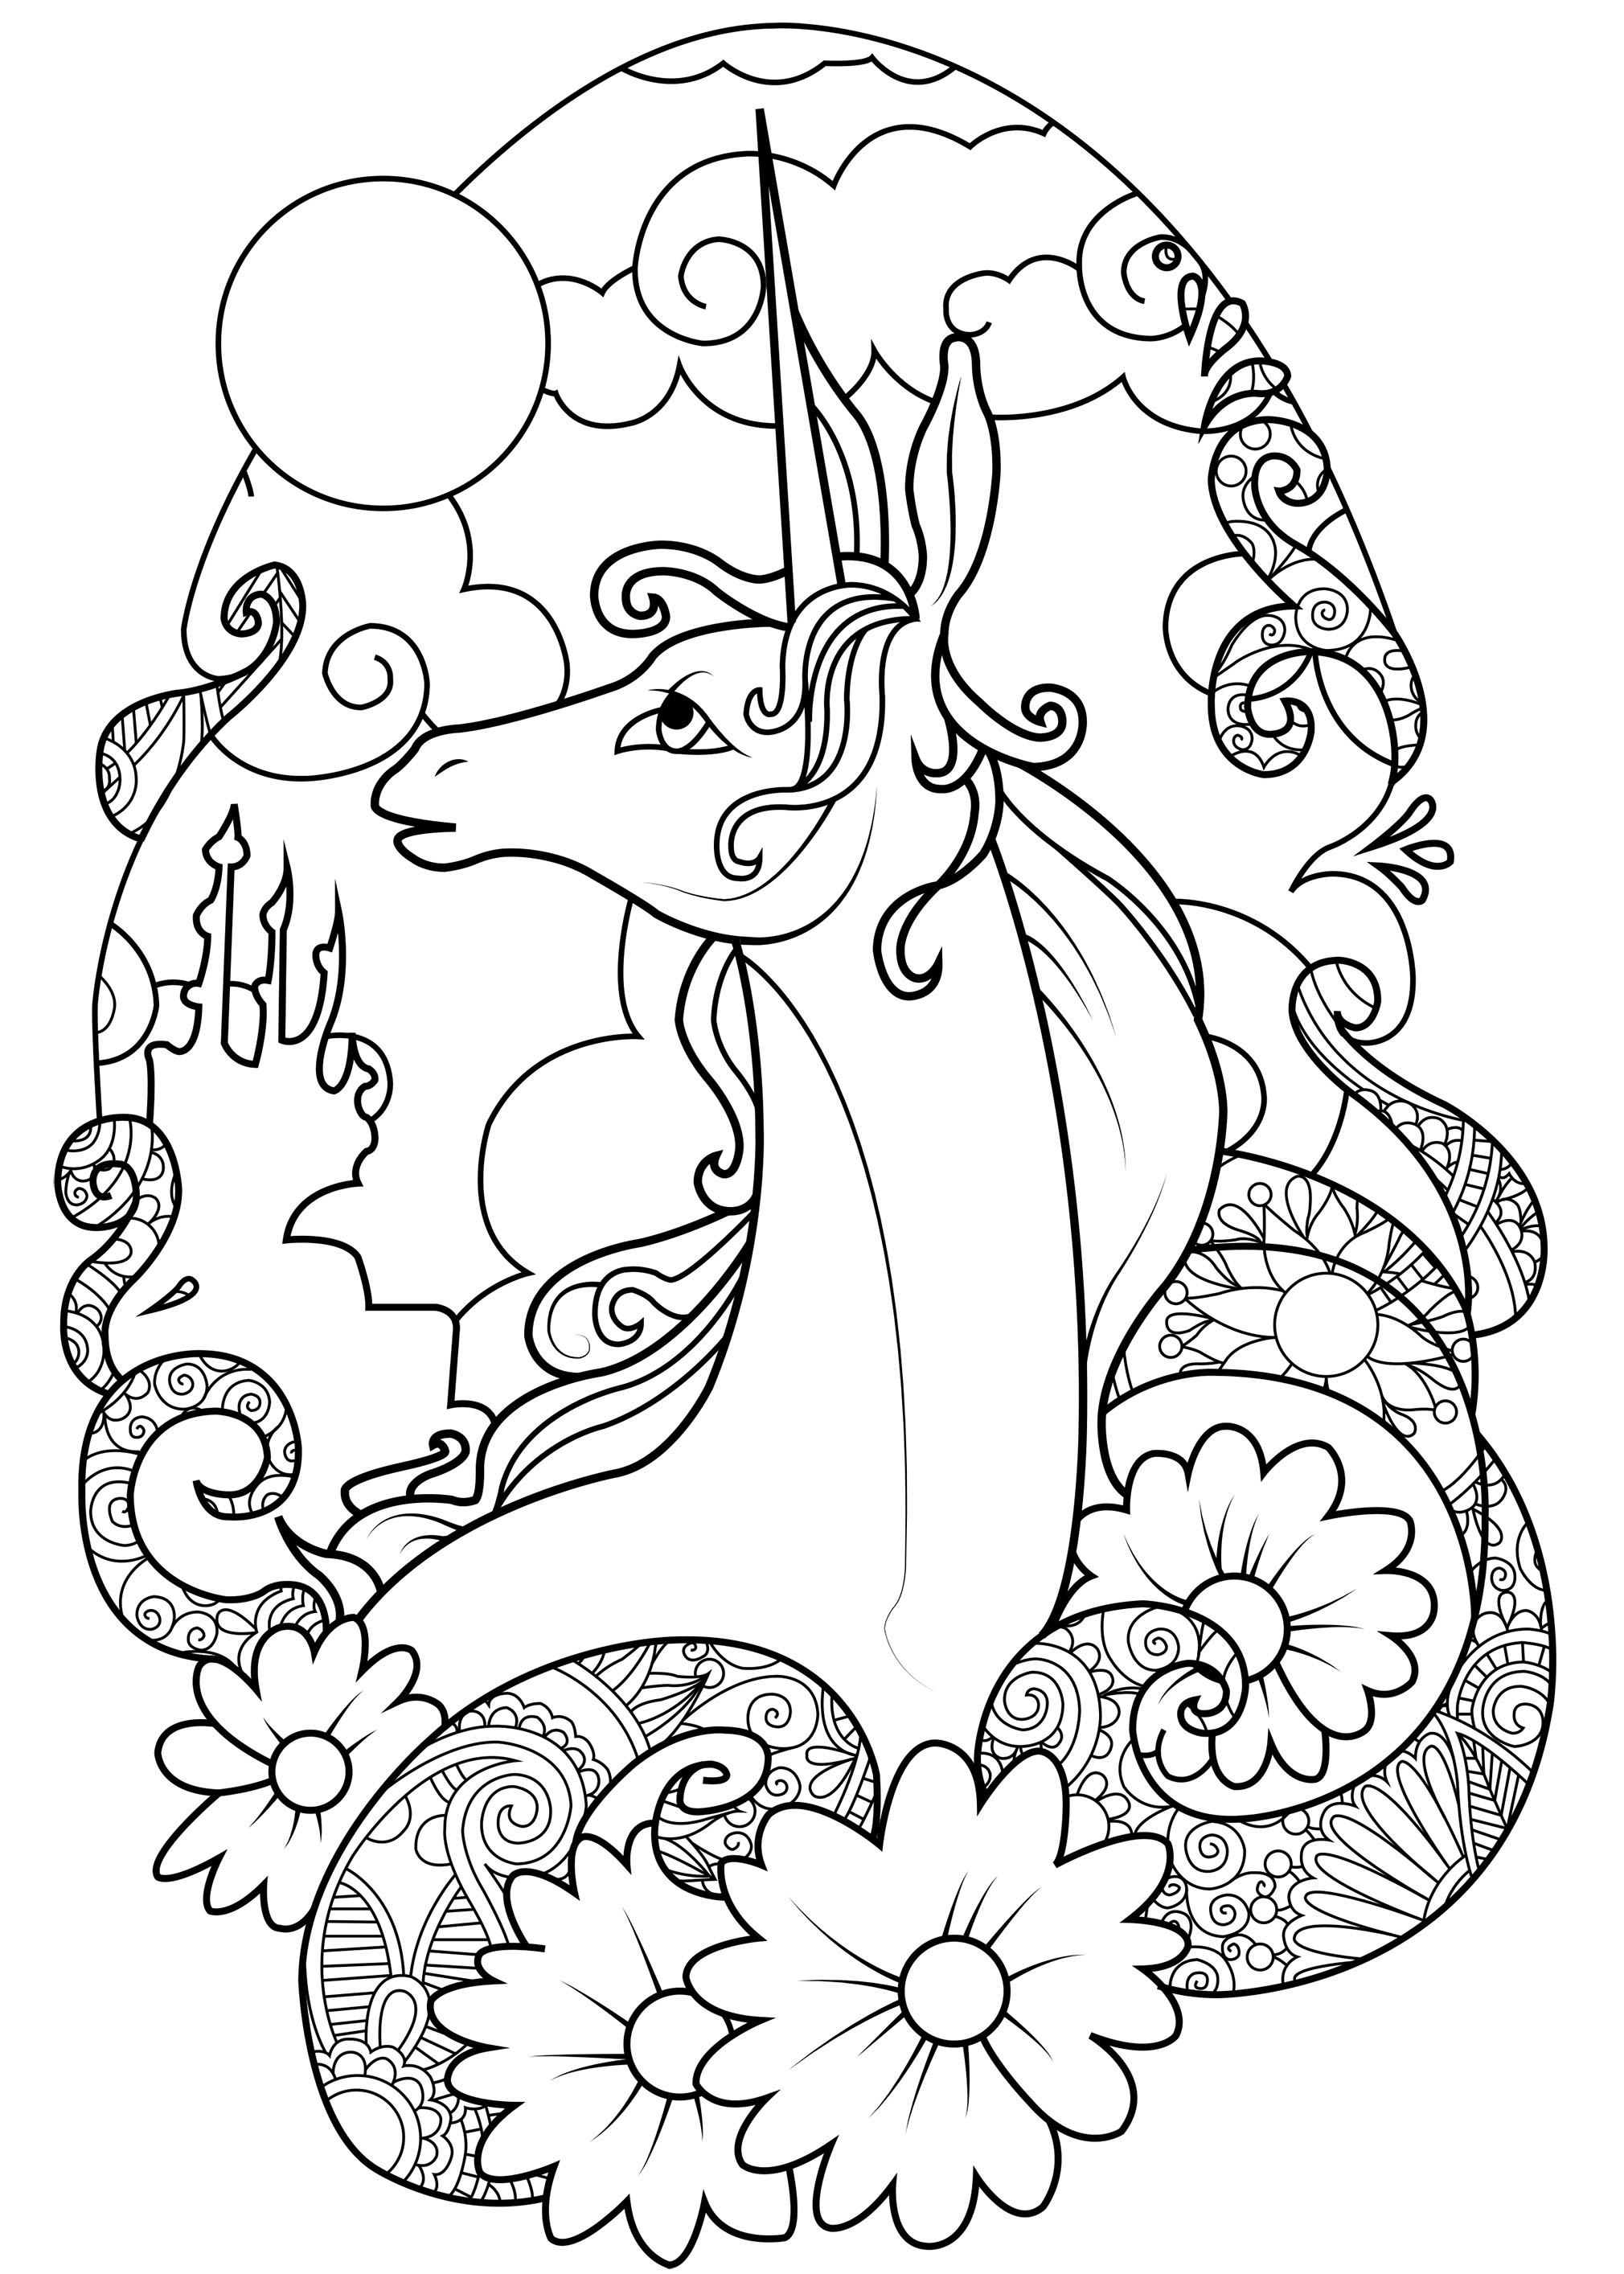 Unicorno Coloring Pages Fairy Unicorn Unicorns Adult Coloring Pages